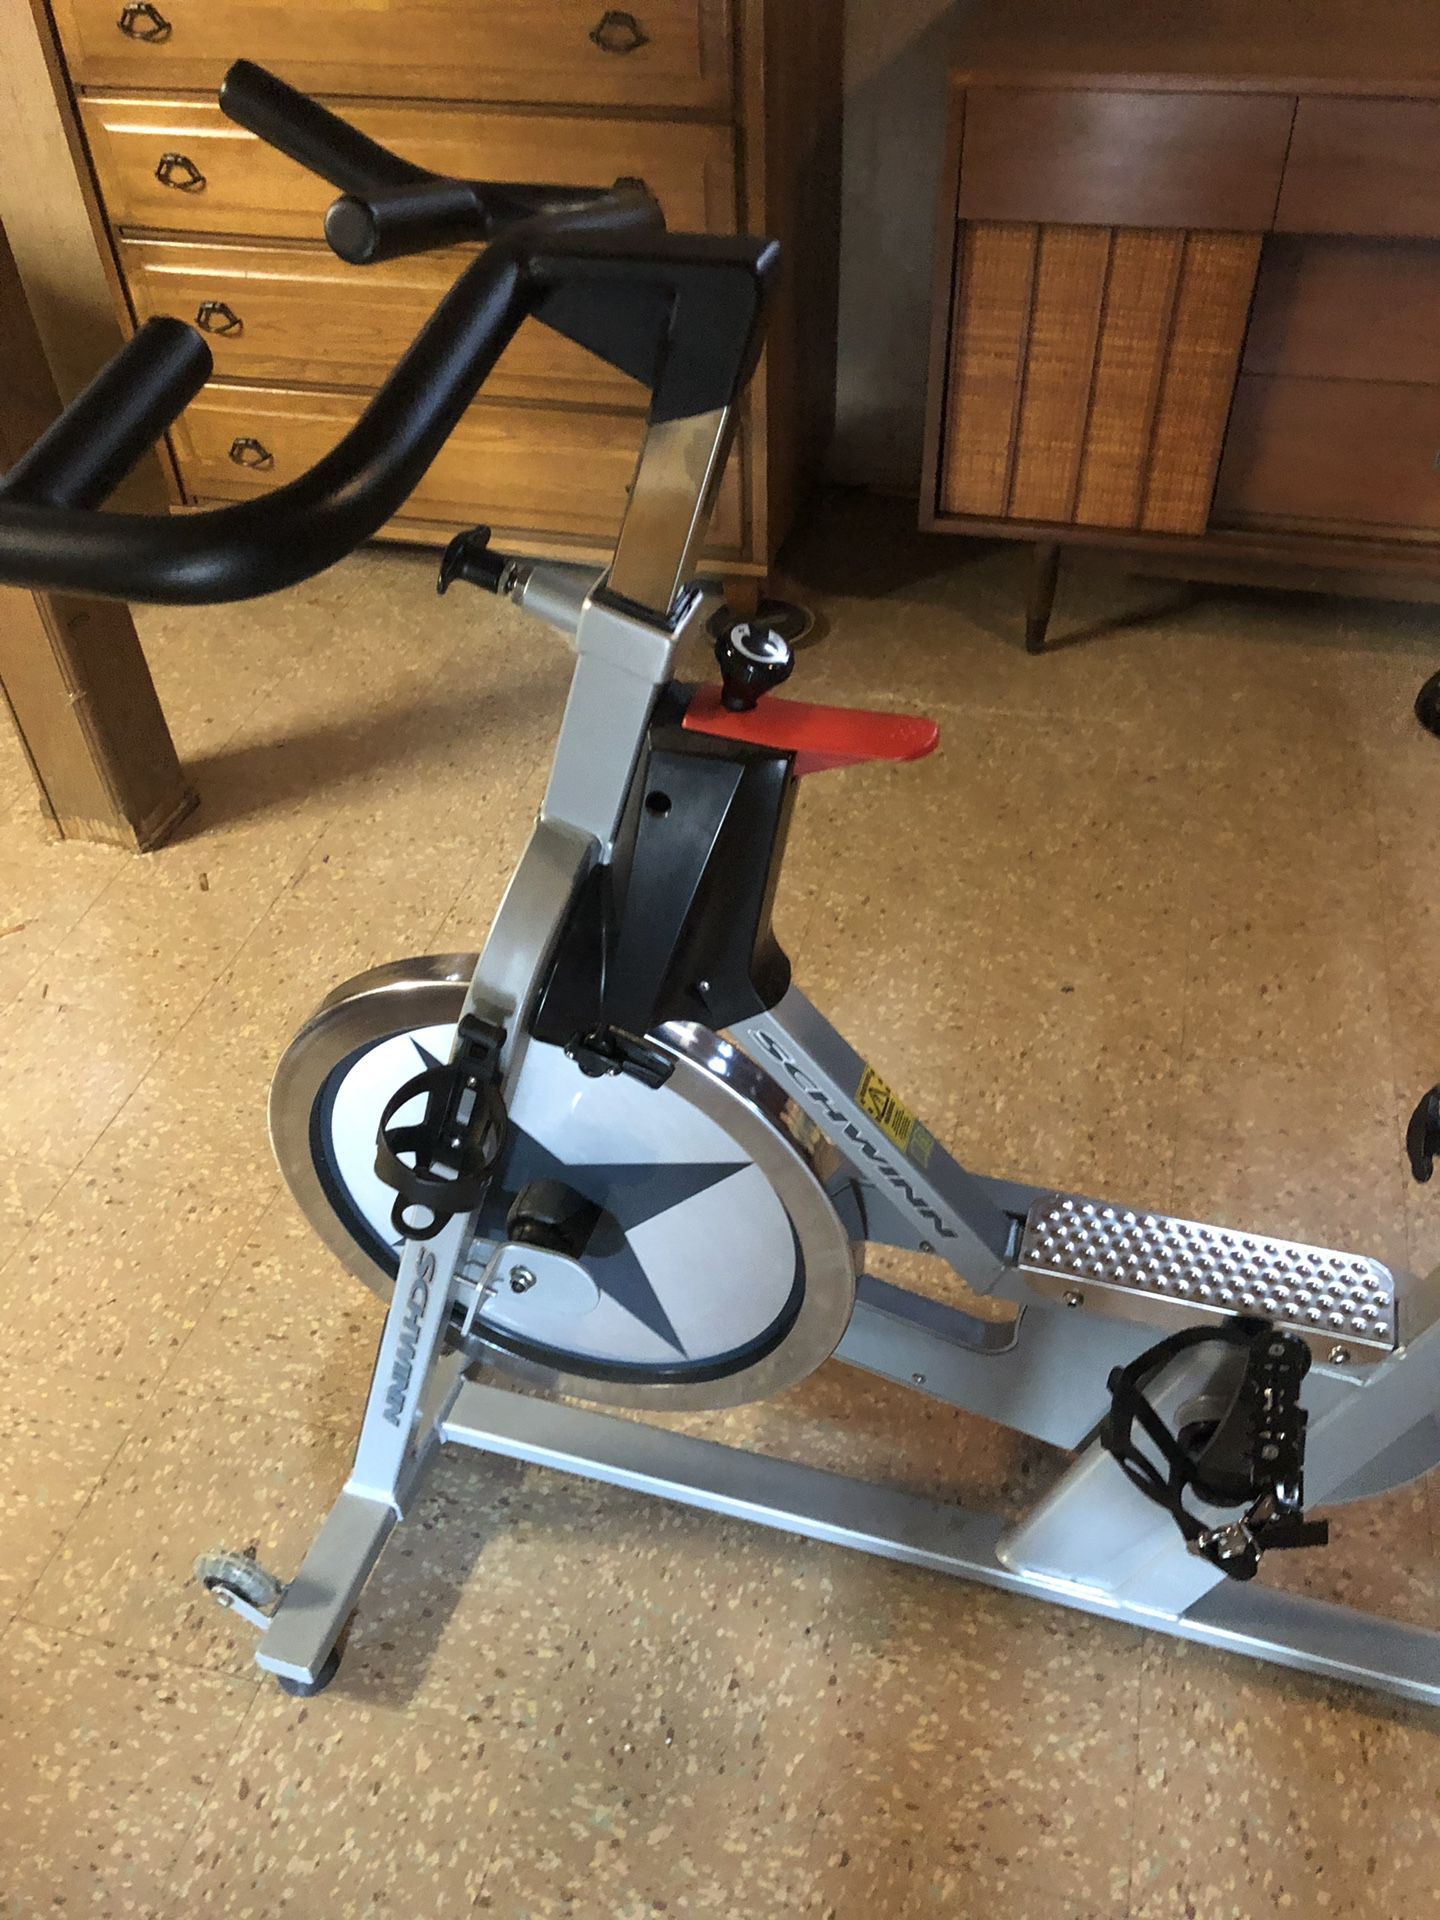 Schwinn IC Pro stationary bike. Used once! Brand new condition. Gathering dust in the basement. Want it gone.